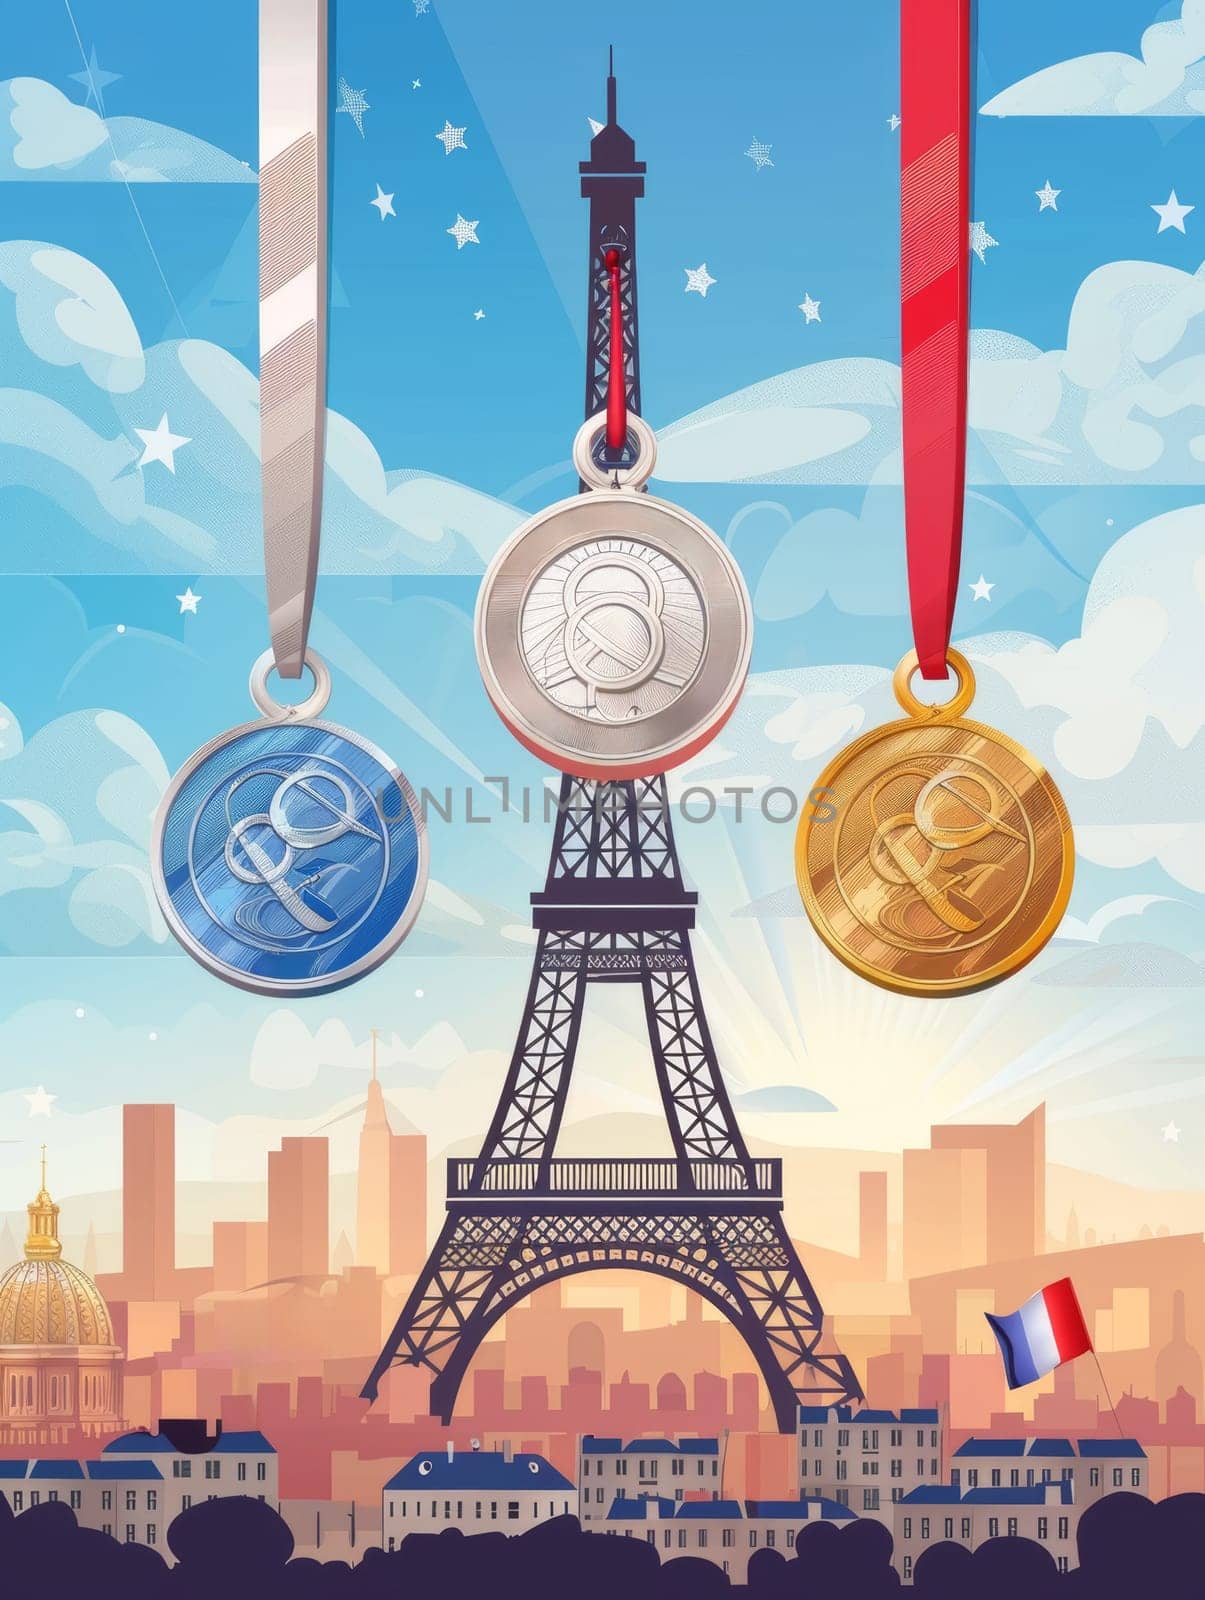 An artistic representation of marathon medals with intricate designs, hanging with the Eiffel Tower gracing the background under a starry sky